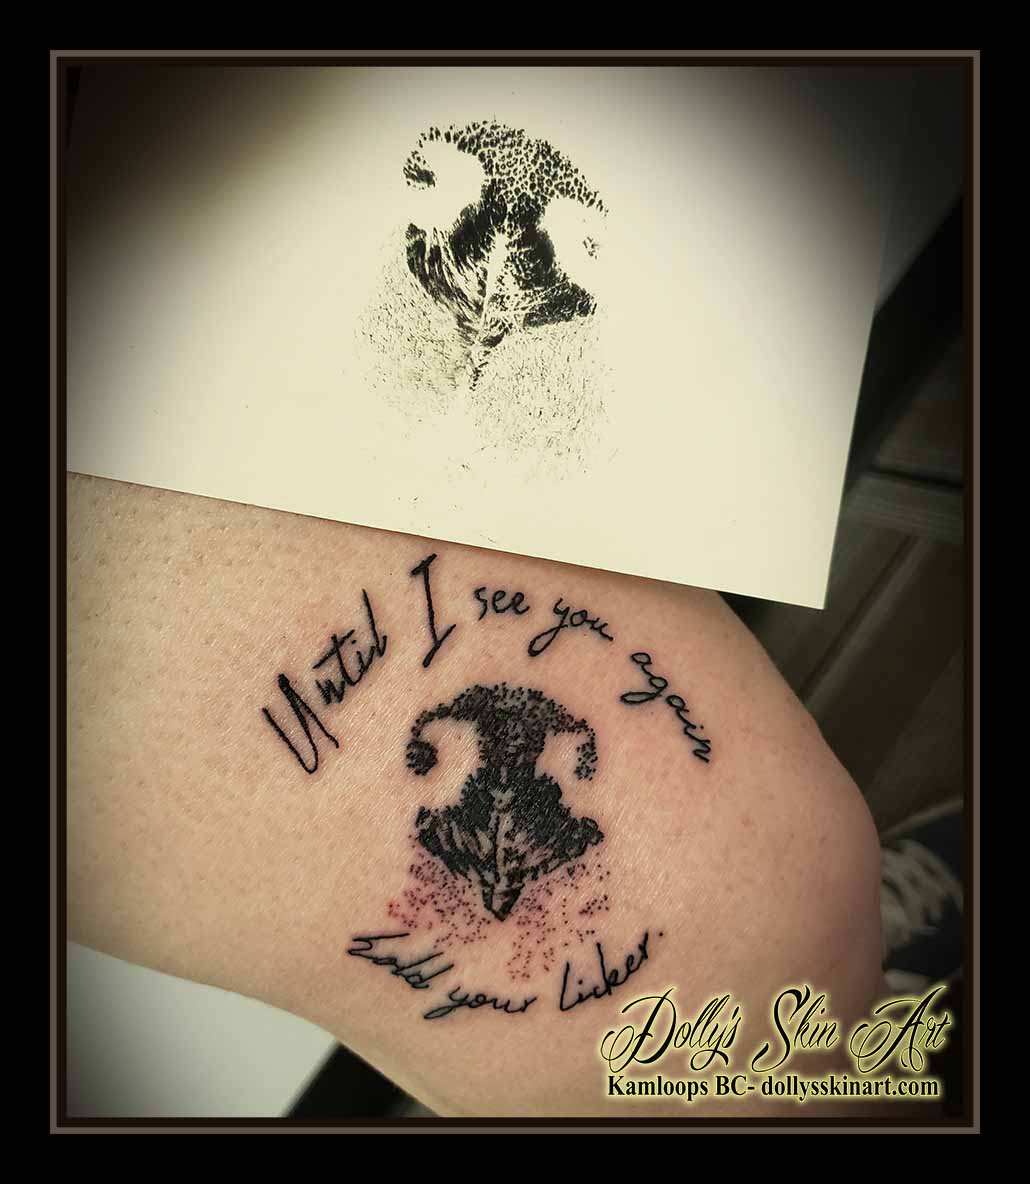 nose print tattoo dog puppy ink black inkprint until i see you again hold your licker lettering script tattoo kamloops dolly's skin art